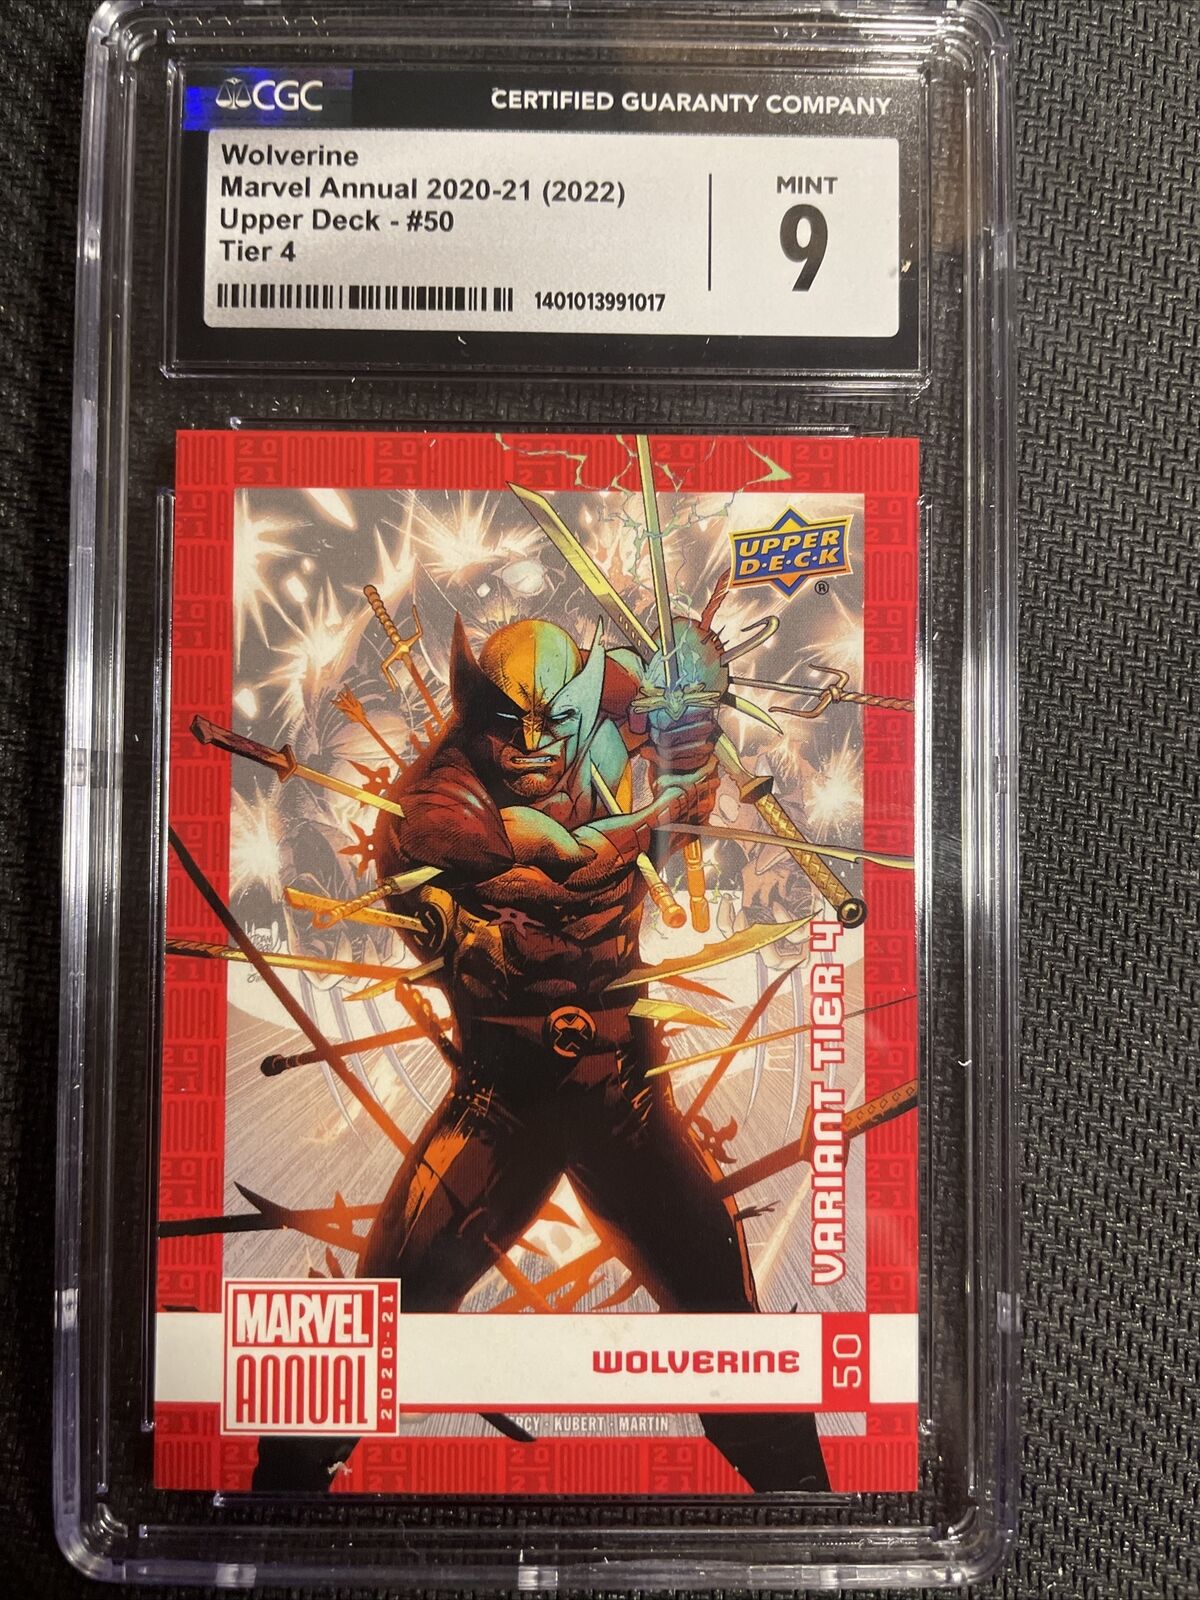 2020-21 Upper Deck Marvel Annual Cover Variants Wolverine Tier 4 #50 CGC Mint 9